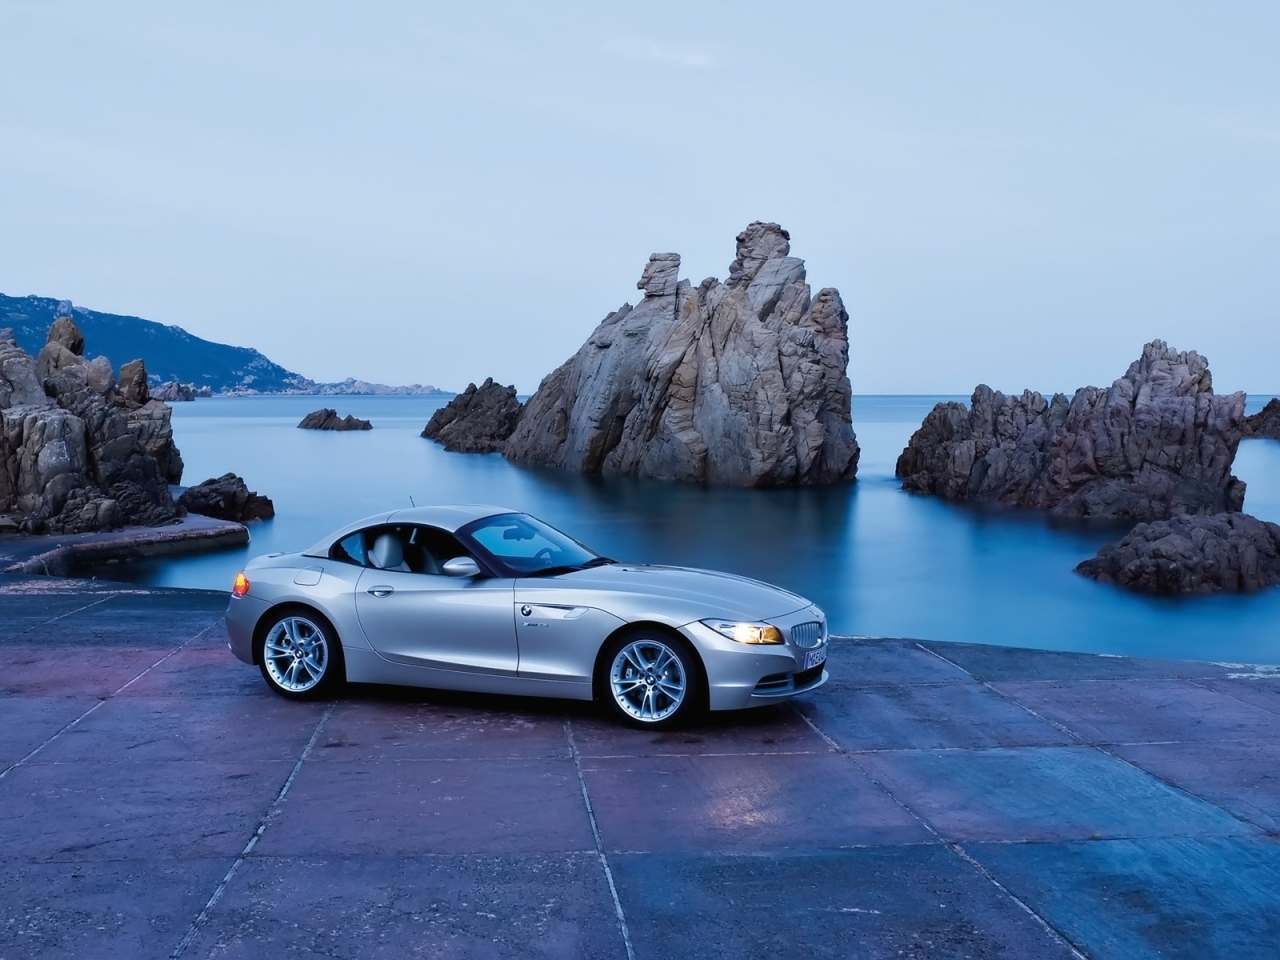 BMW Z4 Roadster Seashore 2009 for 1280 x 960 resolution